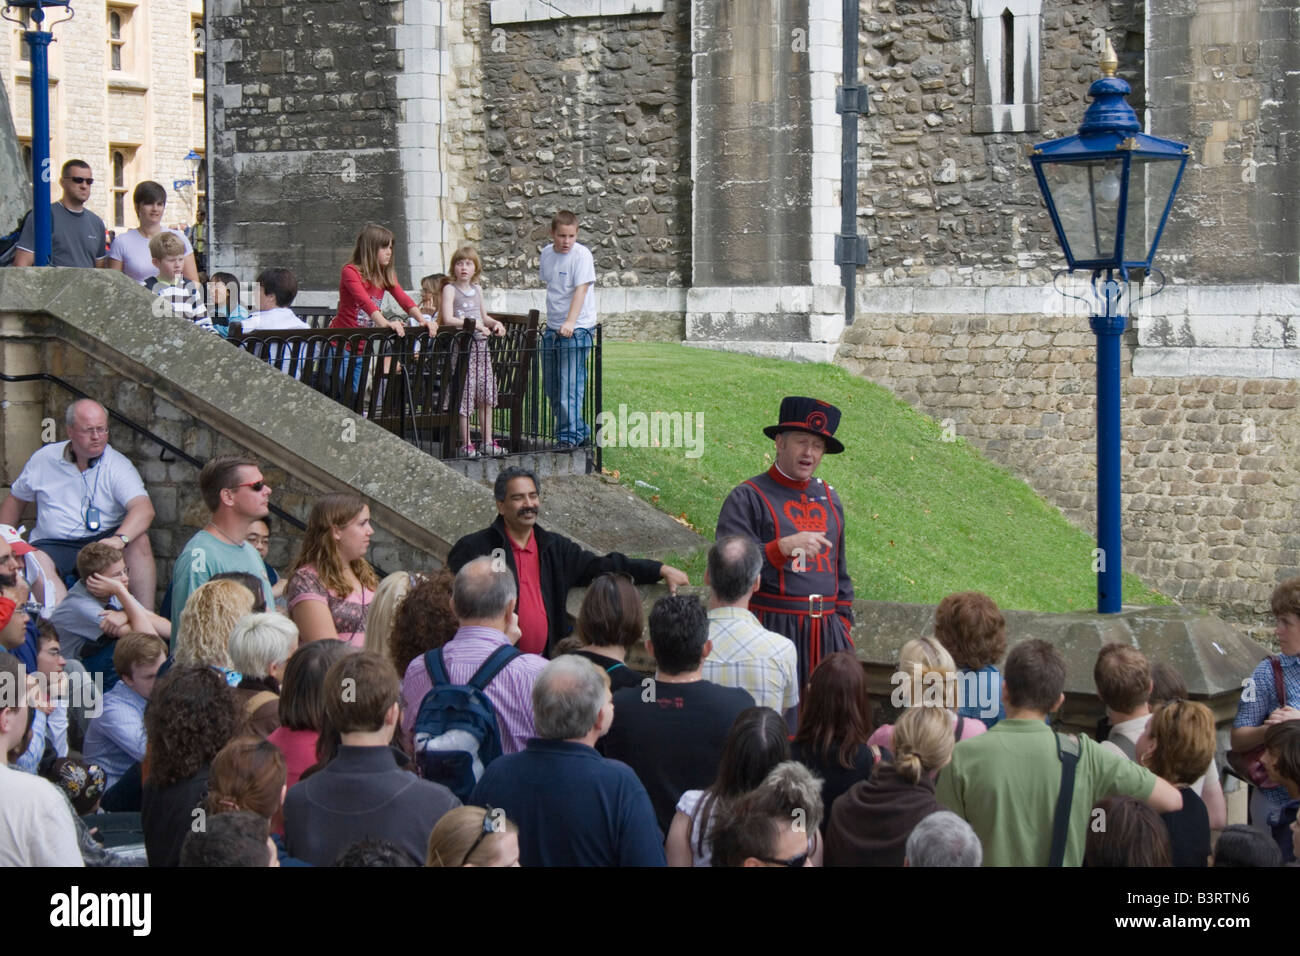 Beefeater am Tower of London Stockfoto